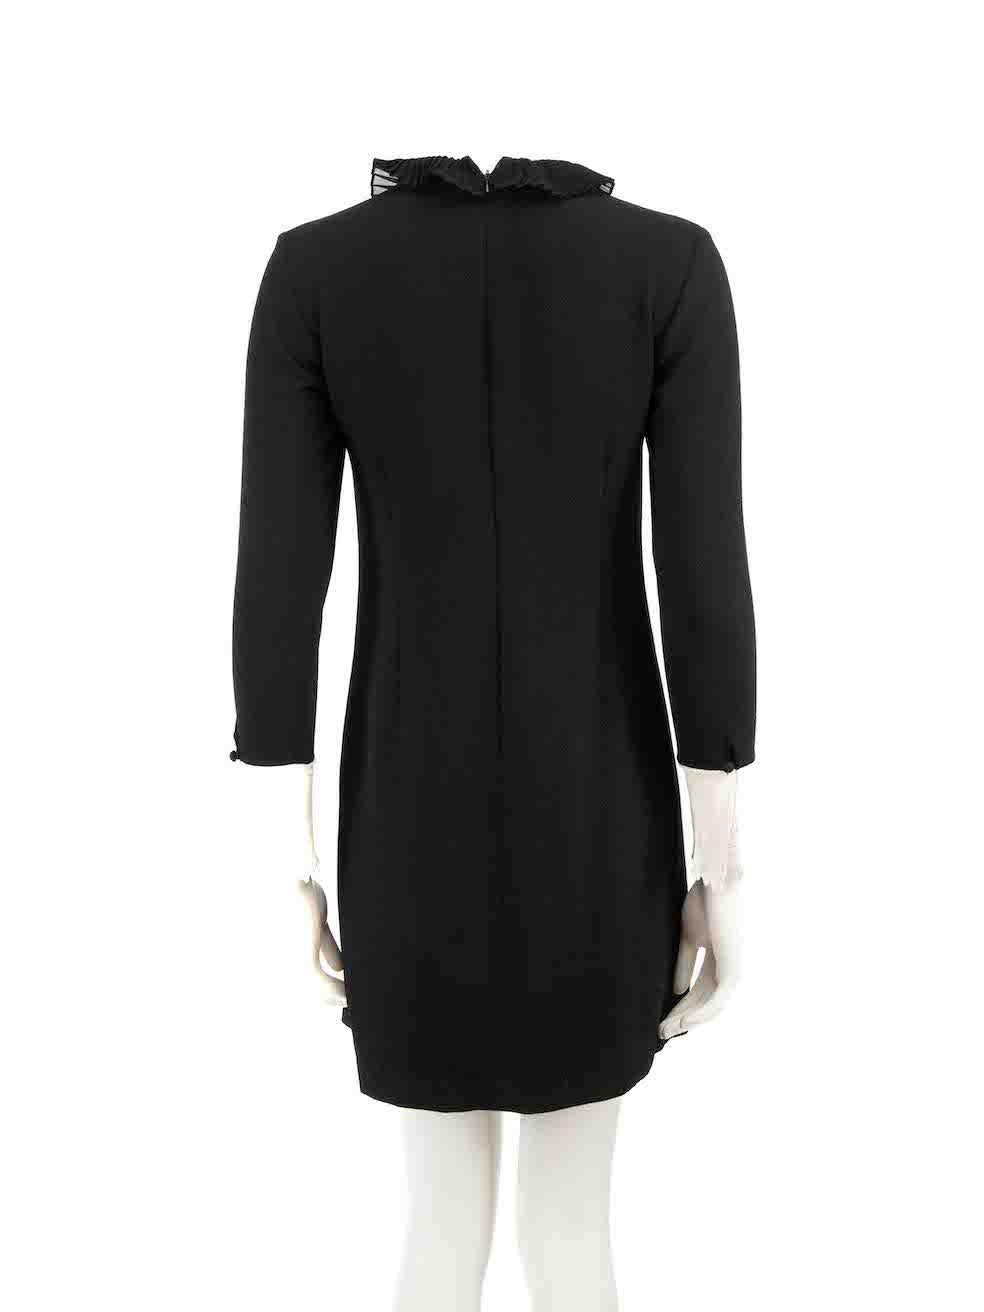 Sandro Black Pleated Collar Detail Mini Dress Size S In Good Condition For Sale In London, GB